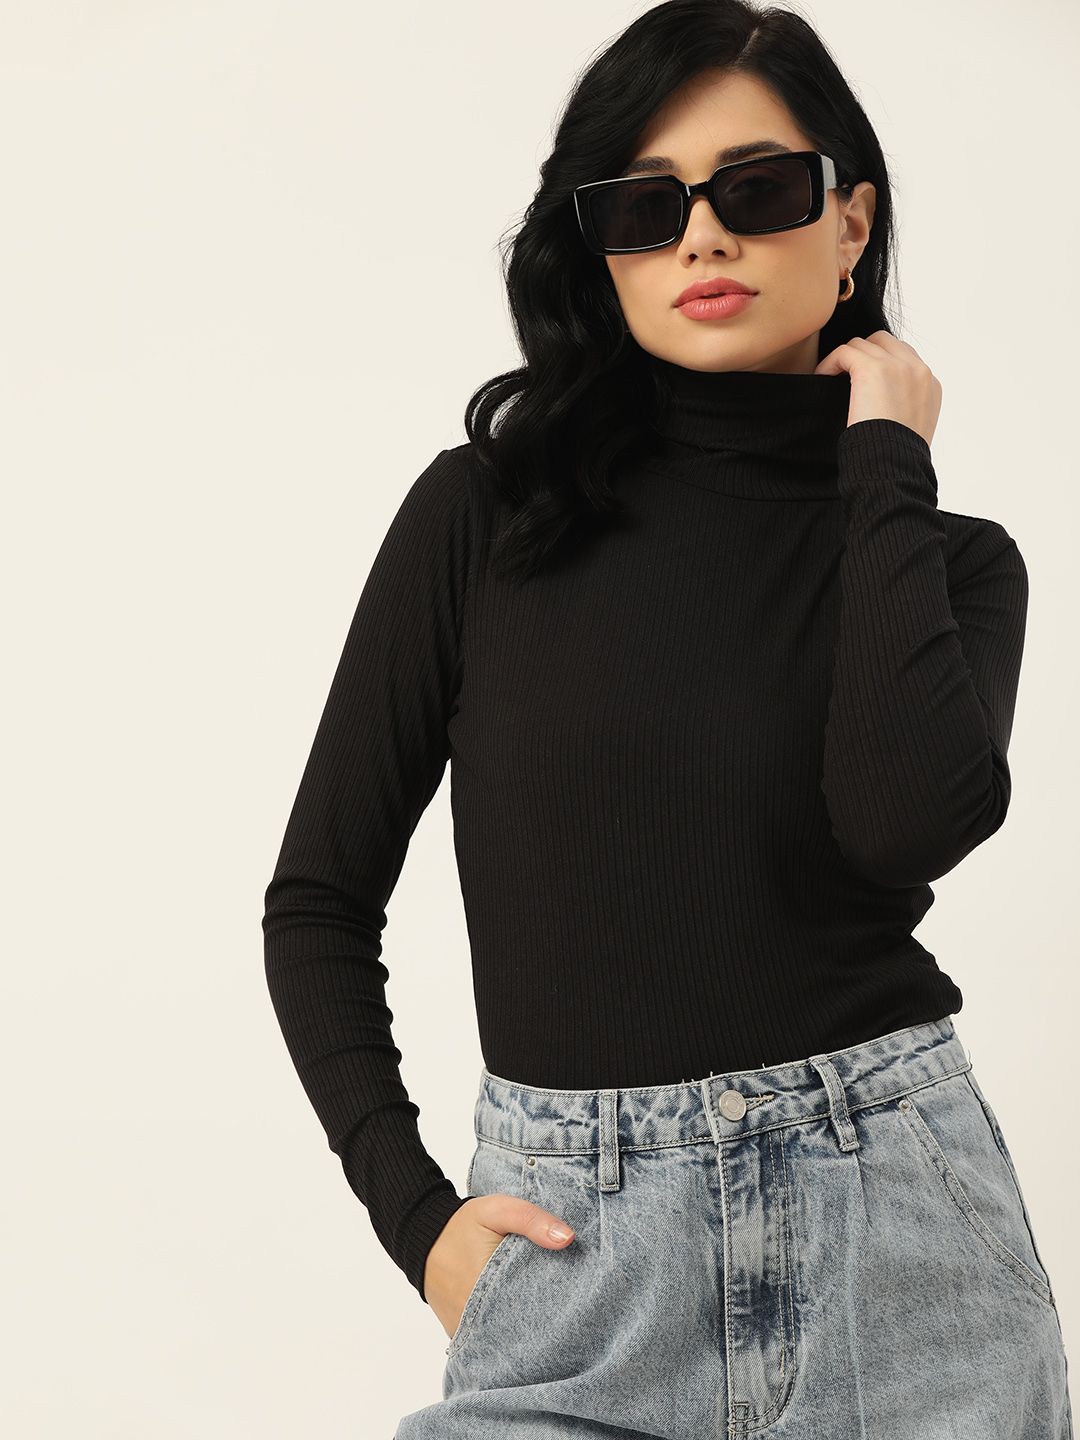 DressBerry Black Self-Striped High-Neck Fitted Top Price in India